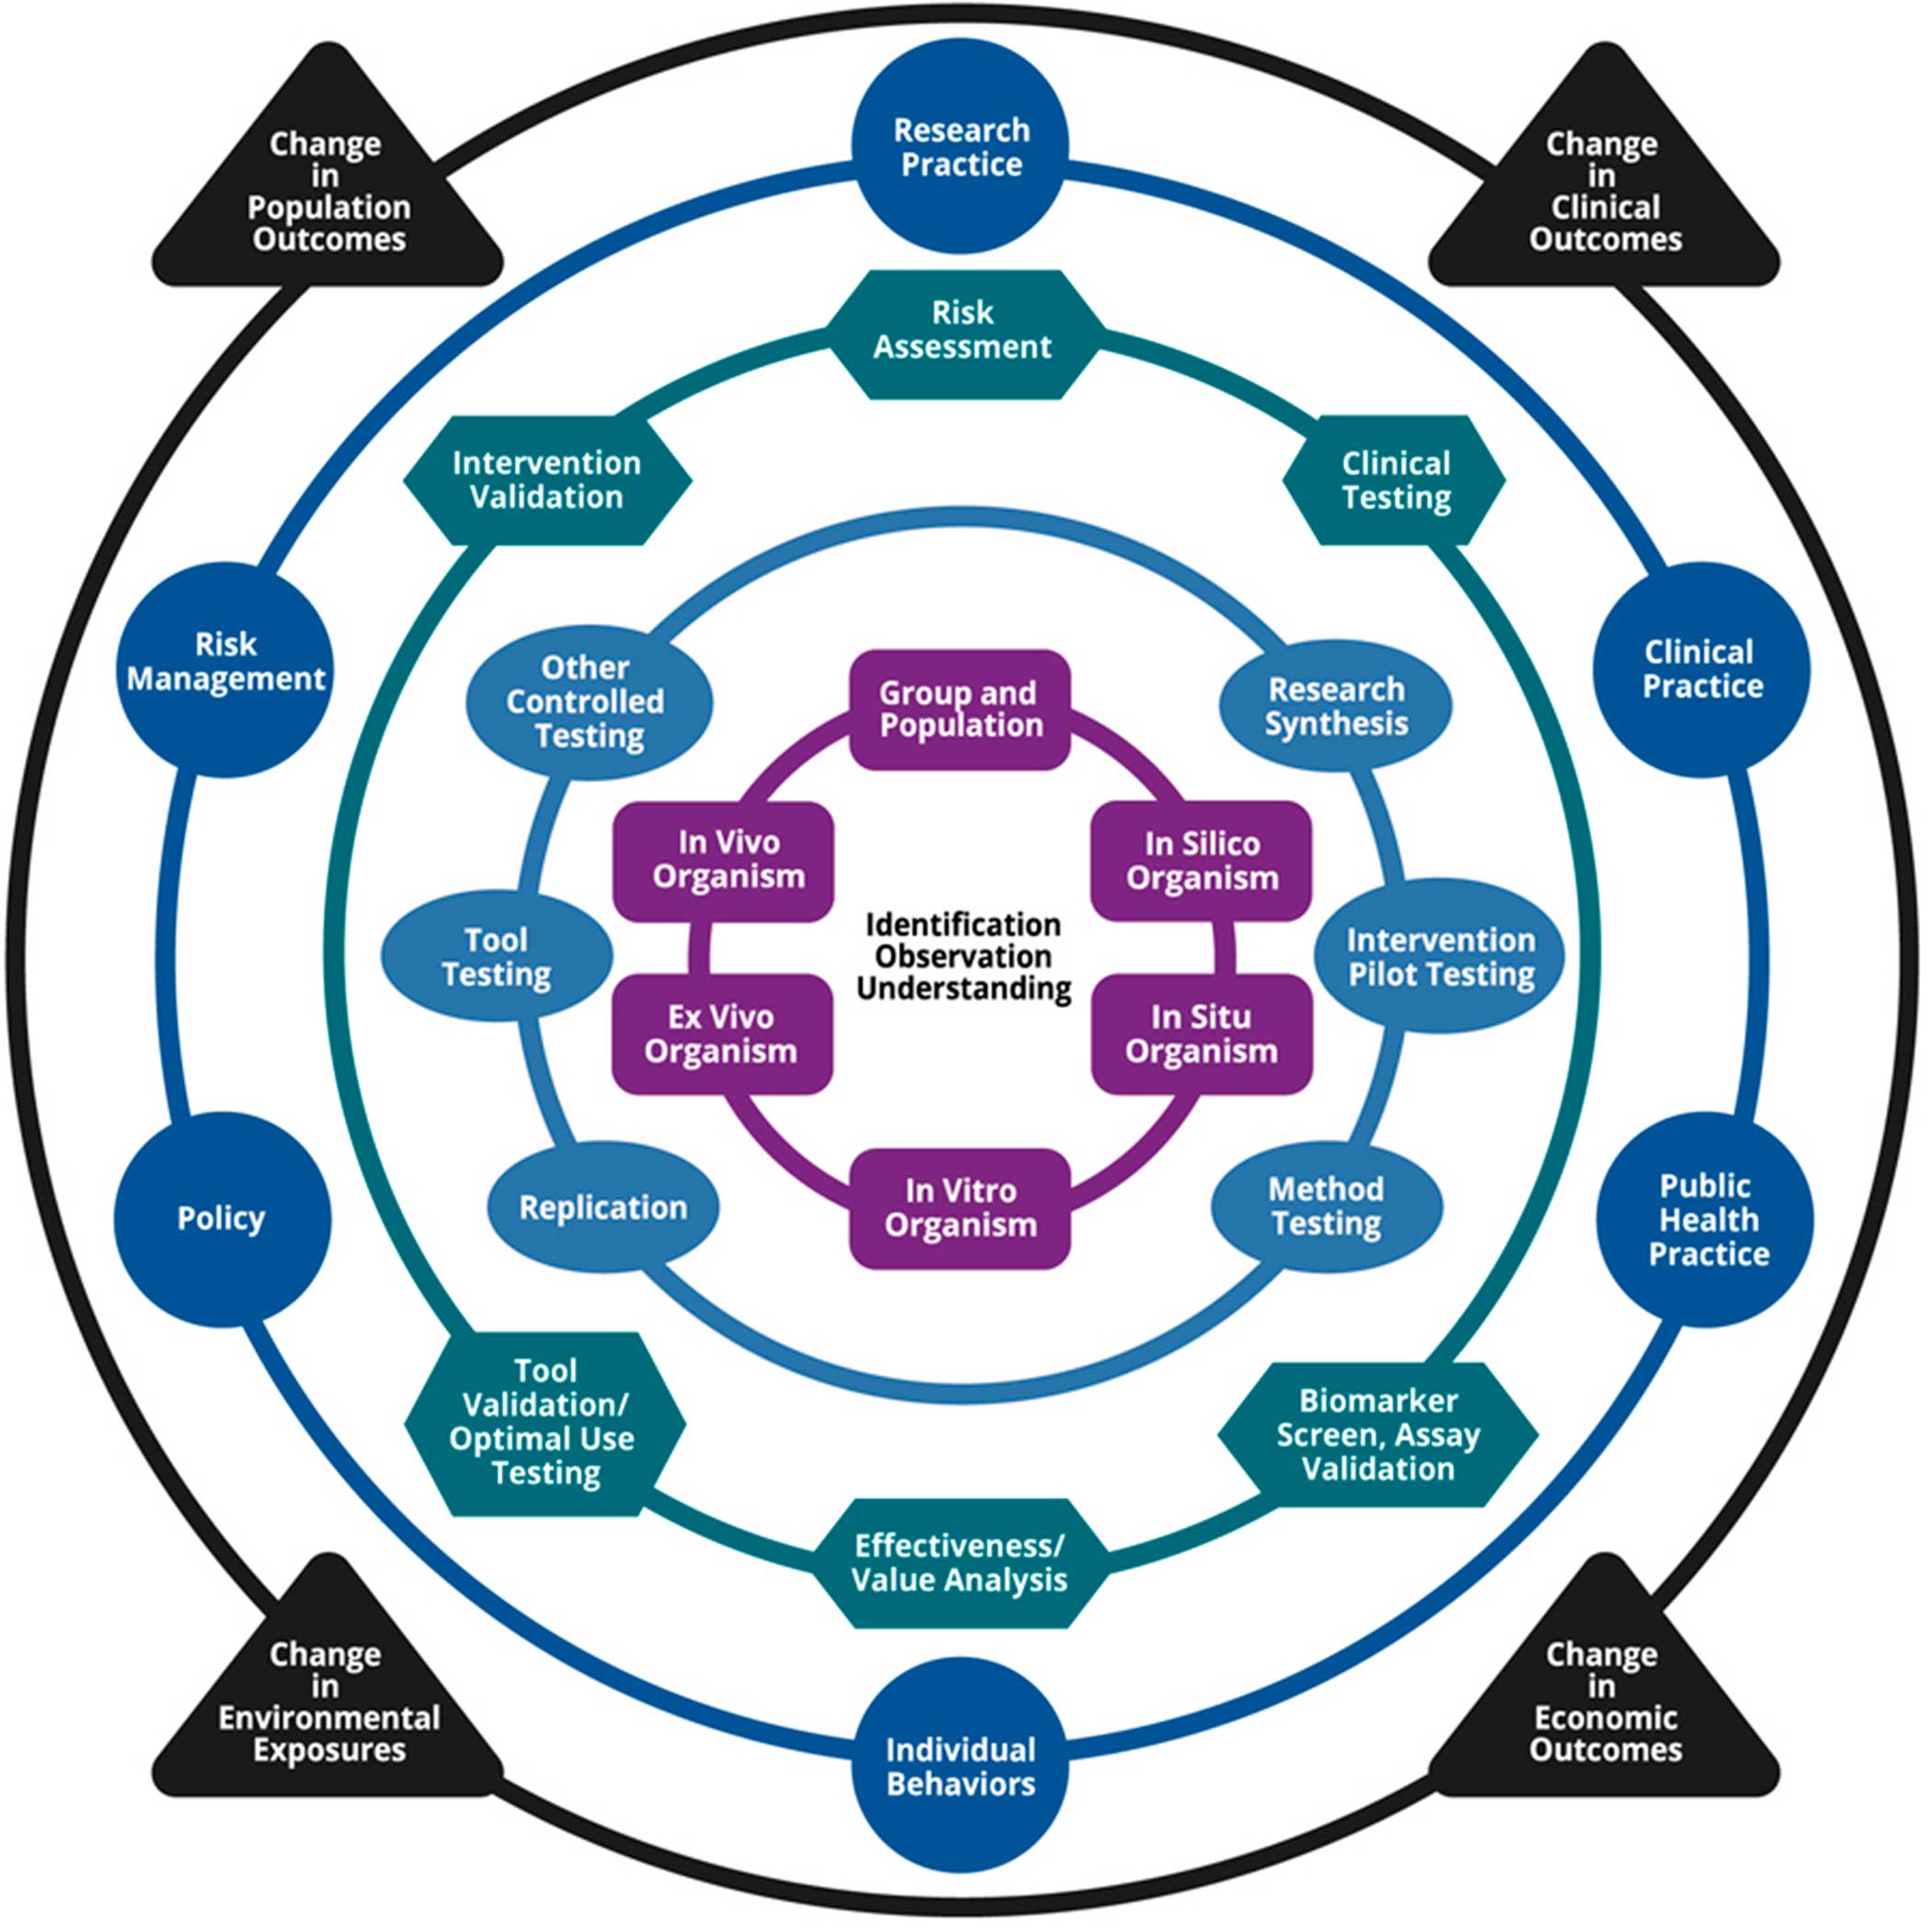 The Full Translational Research Framework represents five categories of translational research in concentric rings: fundamental questions (rectangles), application and synthesis (oval), implementation and adjustment (hexagons), practice (circle) and public health impacts (triangles). Within each ring, nodes describe the types of activities that might occur. In this diagram we combine all five rings and their respective nodes or activities, as described above, into one model of the full framework. The model is shown as a series of concentric rings. The inner ring is Fundamental Questions, the next ring is Application and Synthesis, followed by Implementation and Adjustment. The fourth ring represents the Practice category of translational research. The outside ring represents the Impacts category.